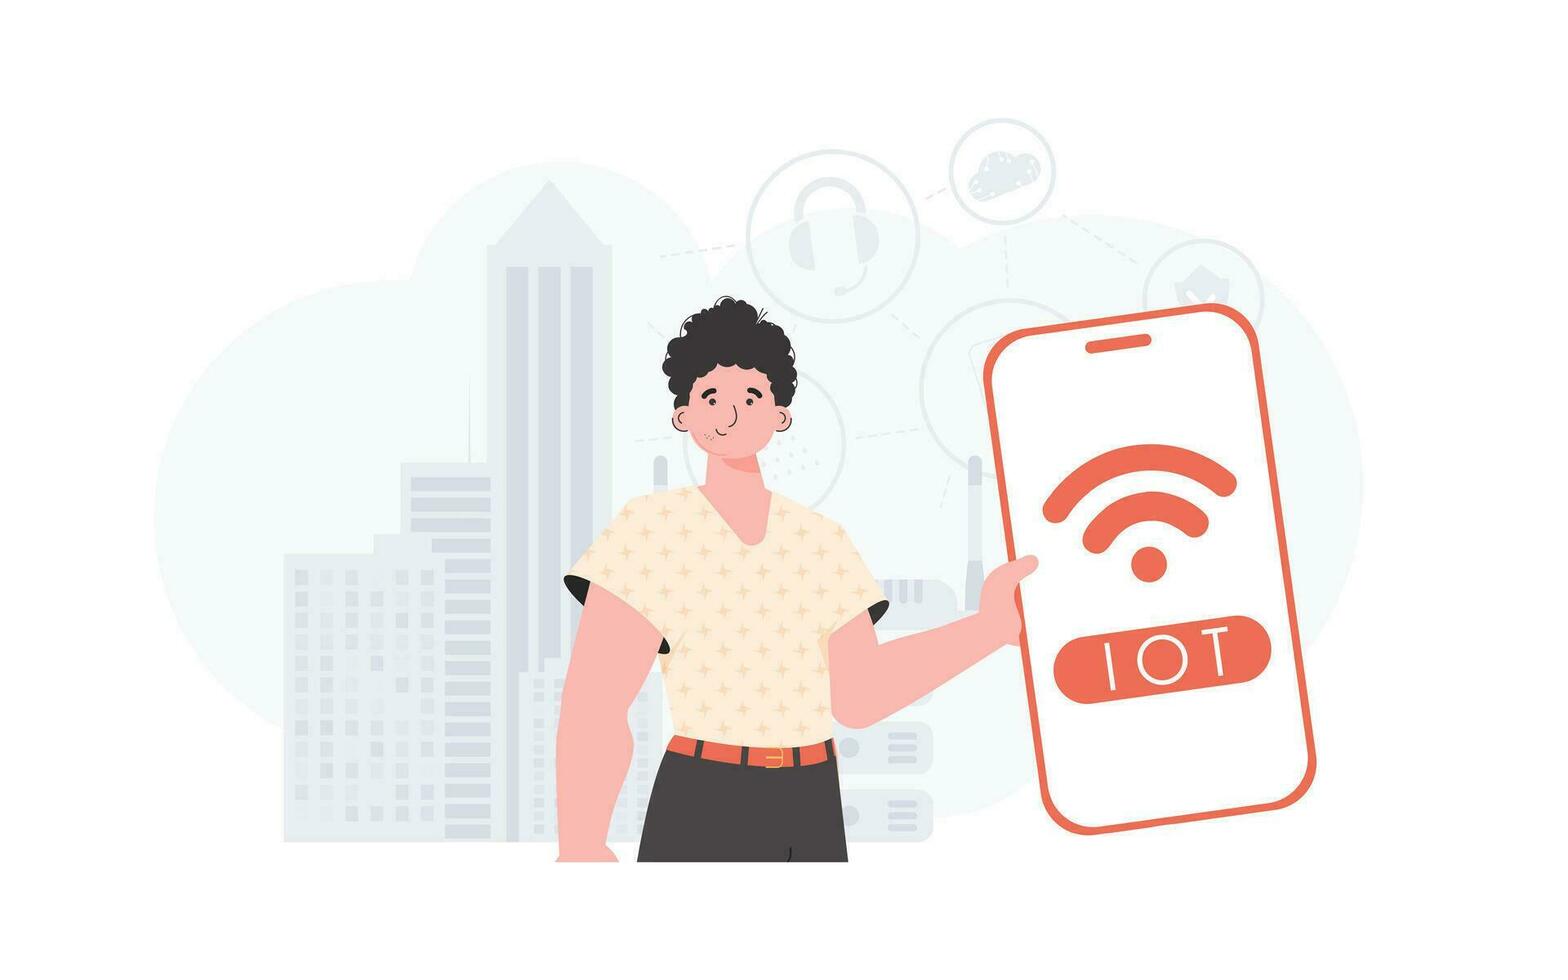 IOT and automation concept. A man holds a phone with the IoT logo in his hands. Trendy flat style. Vector illustration.